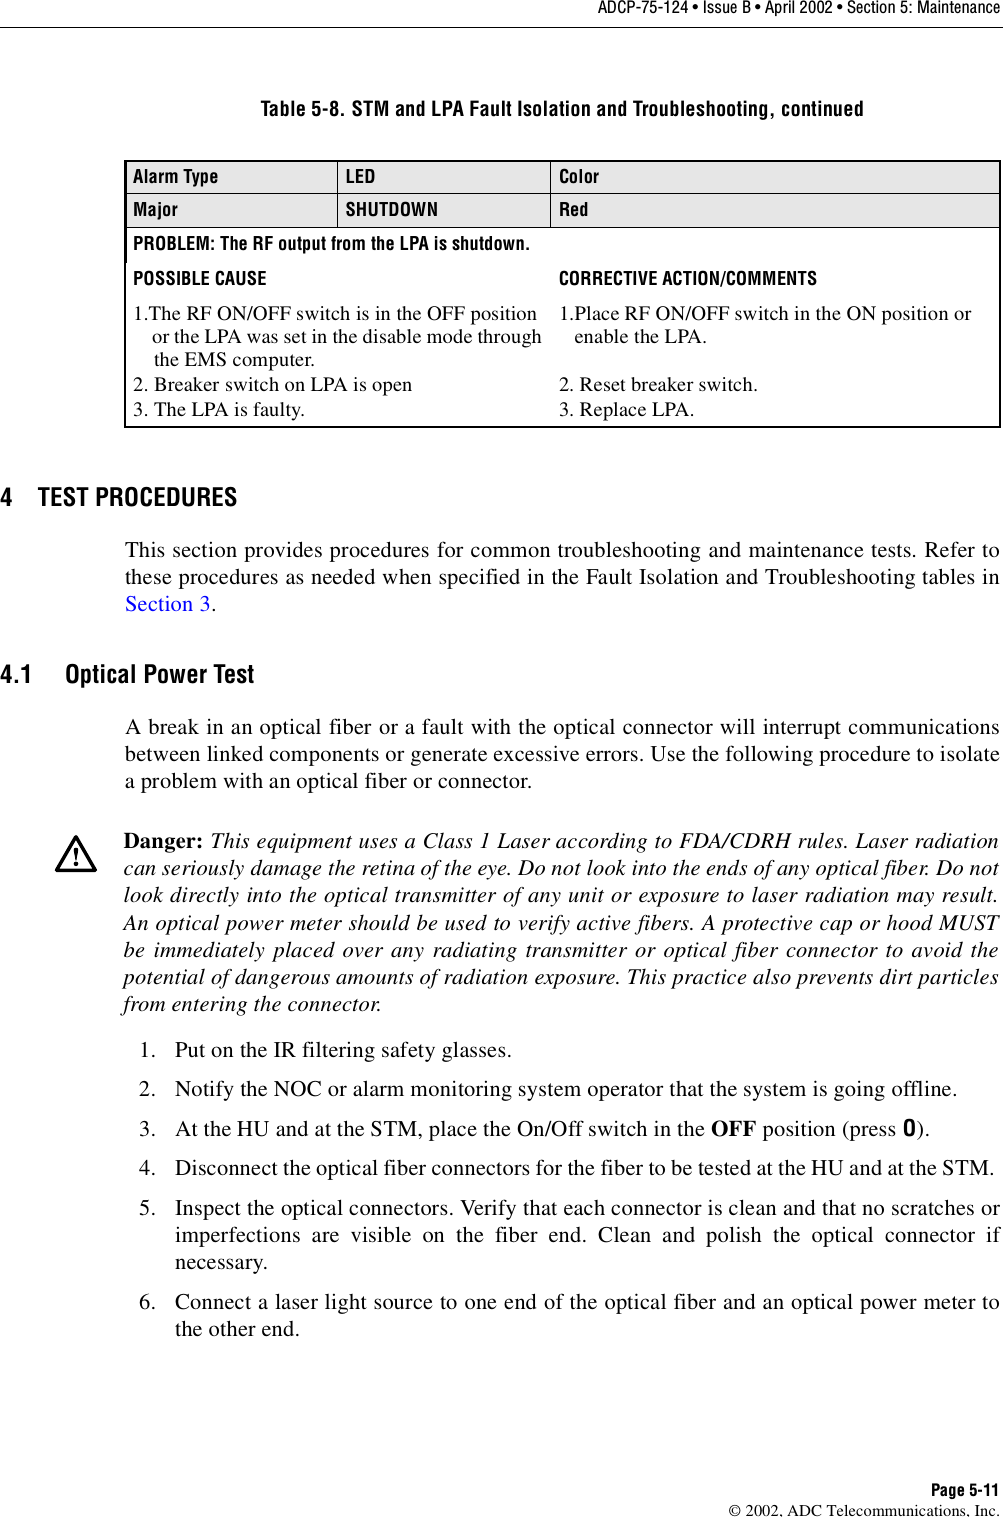 ADCP-75-124 • Issue B • April 2002 • Section 5: MaintenancePage 5-11©2002, ADC Telecommunications, Inc.4 TEST PROCEDURESThis section provides procedures for common troubleshooting and maintenance tests. Refer tothese procedures as needed when specified in the Fault Isolation and Troubleshooting tables inSection 3.4.1 Optical Power TestAbreak in an optical fiber or afault with the optical connector will interrupt communicationsbetween linked components or generate excessive errors. Use the following procedure to isolateaproblem with an optical fiber or connector.1. Put on the IR filtering safety glasses.2. Notify the NOC or alarm monitoring system operator that the system is going offline.3. At the HU and at the STM, place the On/Off switch in the OFF position (press O).4. Disconnect the optical fiber connectors for the fiber to be tested at the HU and at the STM.5. Inspect the optical connectors. Verify that each connector is clean and that no scratches orimperfections are visible on the fiber end. Clean and polish the optical connector ifnecessary.6. Connect alaser light source to one end of the optical fiber and an optical power meter tothe other end.Alarm Type LED ColorMajor SHUTDOWN RedPROBLEM: The RF output from the LPA is shutdown.POSSIBLE CAUSE CORRECTIVE ACTION/COMMENTS1.The RF ON/OFF switch is in the OFF positionor the LPA was set in the disable mode throughthe EMS computer.2. Breaker switch on LPA is open3. The LPA is faulty.1.Place RF ON/OFF switch in the ON position orenable the LPA.2. Reset breaker switch.3. Replace LPA.Danger: This equipment uses aClass 1Laser according to FDA/CDRH rules. Laser radiationcan seriously damage the retina of the eye. Do not look into the ends of any optical fiber. Do notlook directly into the optical transmitter of any unit or exposure to laser radiation may result.An optical power meter should be used to verify active fibers. Aprotective cap or hood MUSTbe immediately placed over any radiating transmitter or optical fiber connector to avoid thepotential of dangerous amounts of radiation exposure. This practice also prevents dirt particlesfrom entering the connector.Table 5-8. STM and LPA Fault Isolation and Troubleshooting, continued